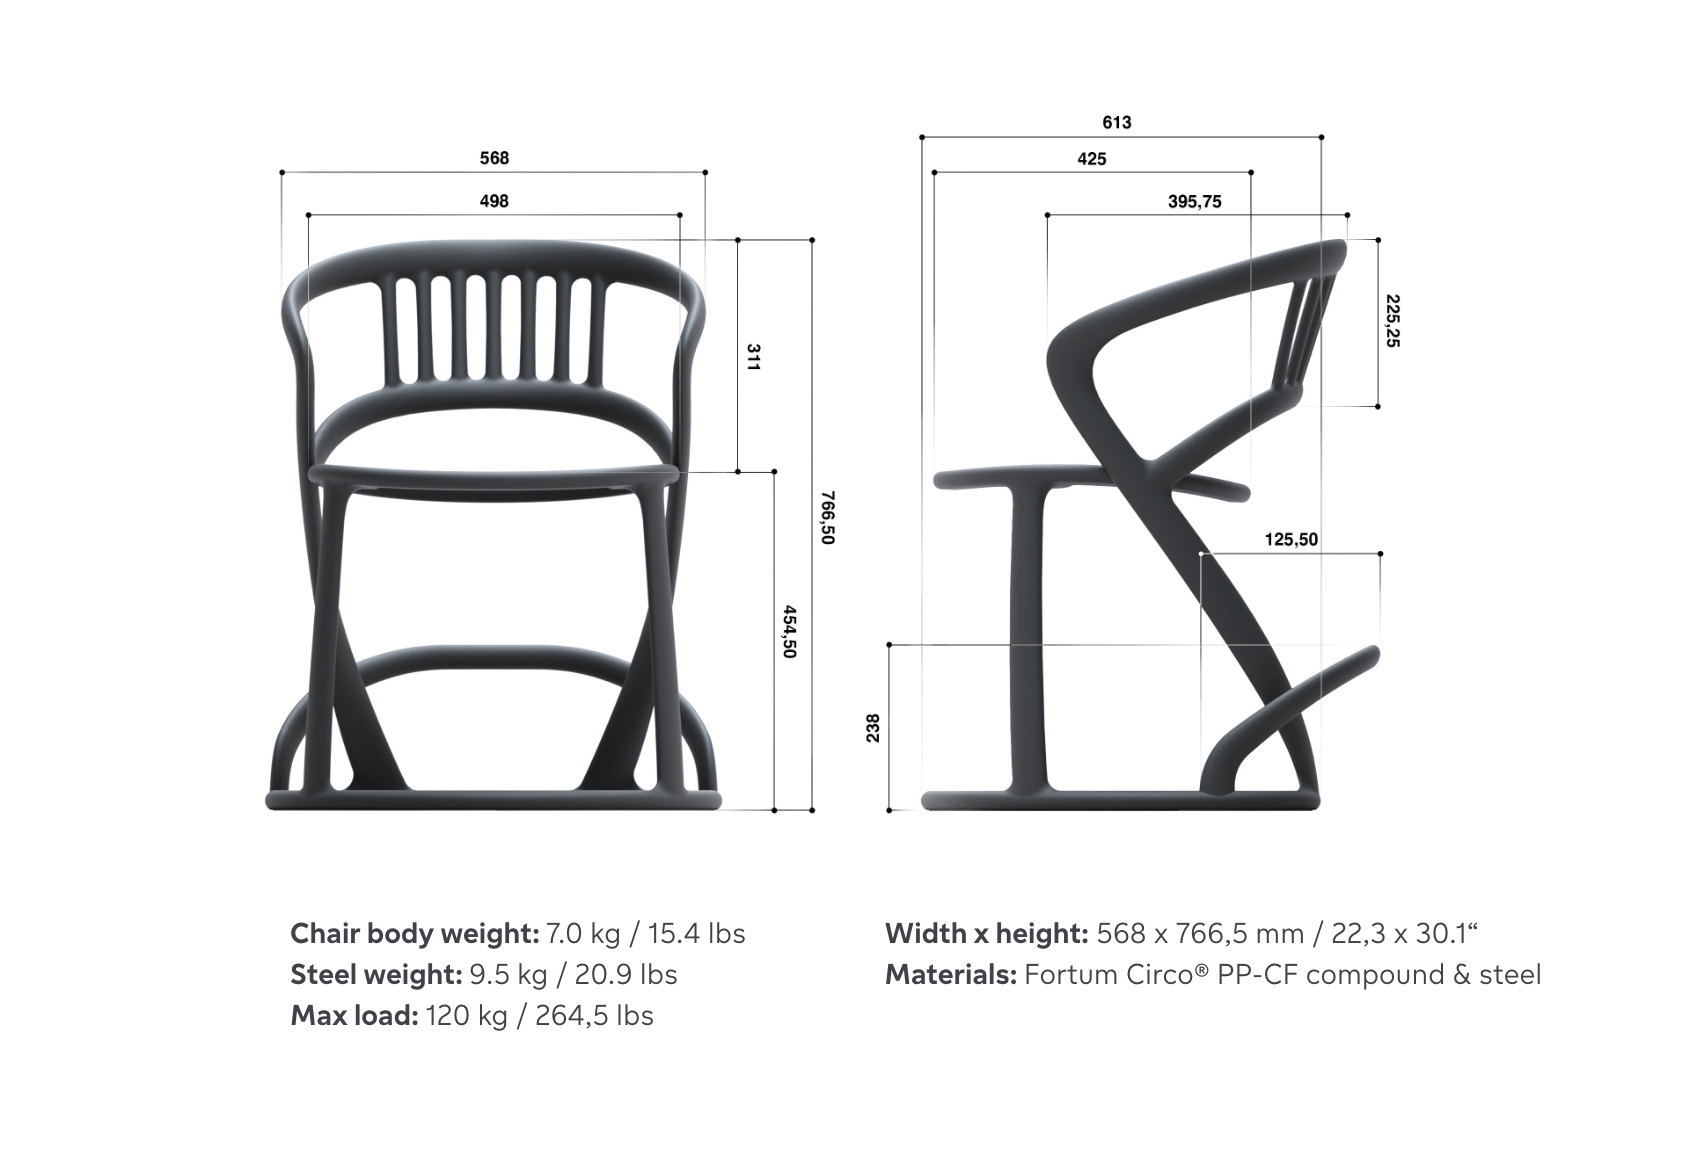 Virén Chair Specifications